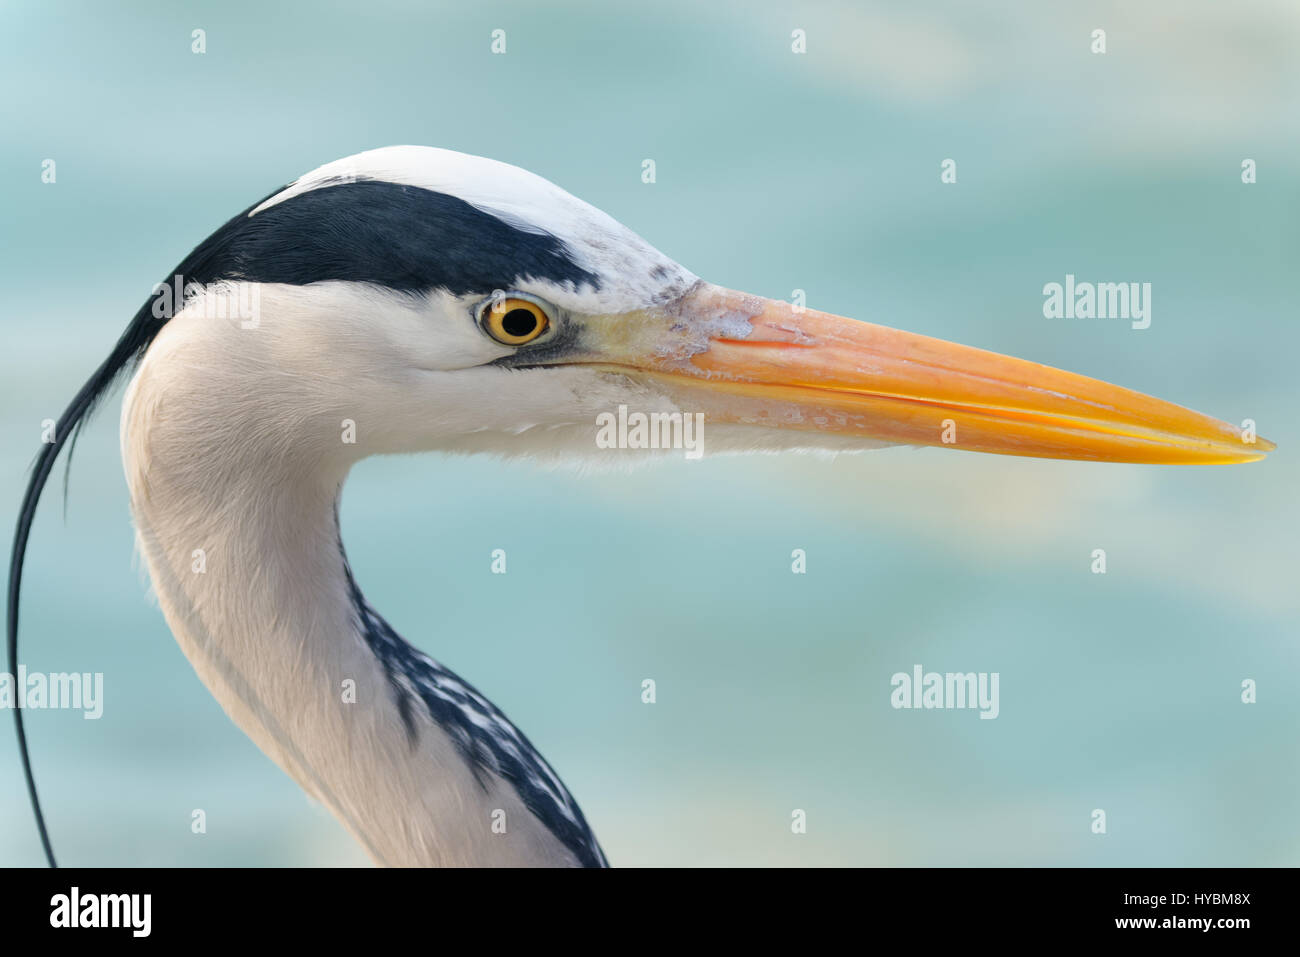 A grey heron has a long yellow beak. Adults have a white head and neck with a broad black stripe that extends from the eye to the black crest. They are living in temperate Europe, Asia and parts of Africa.|Western Grey Heron (Ardea cinerea cinerea) Stock Photo